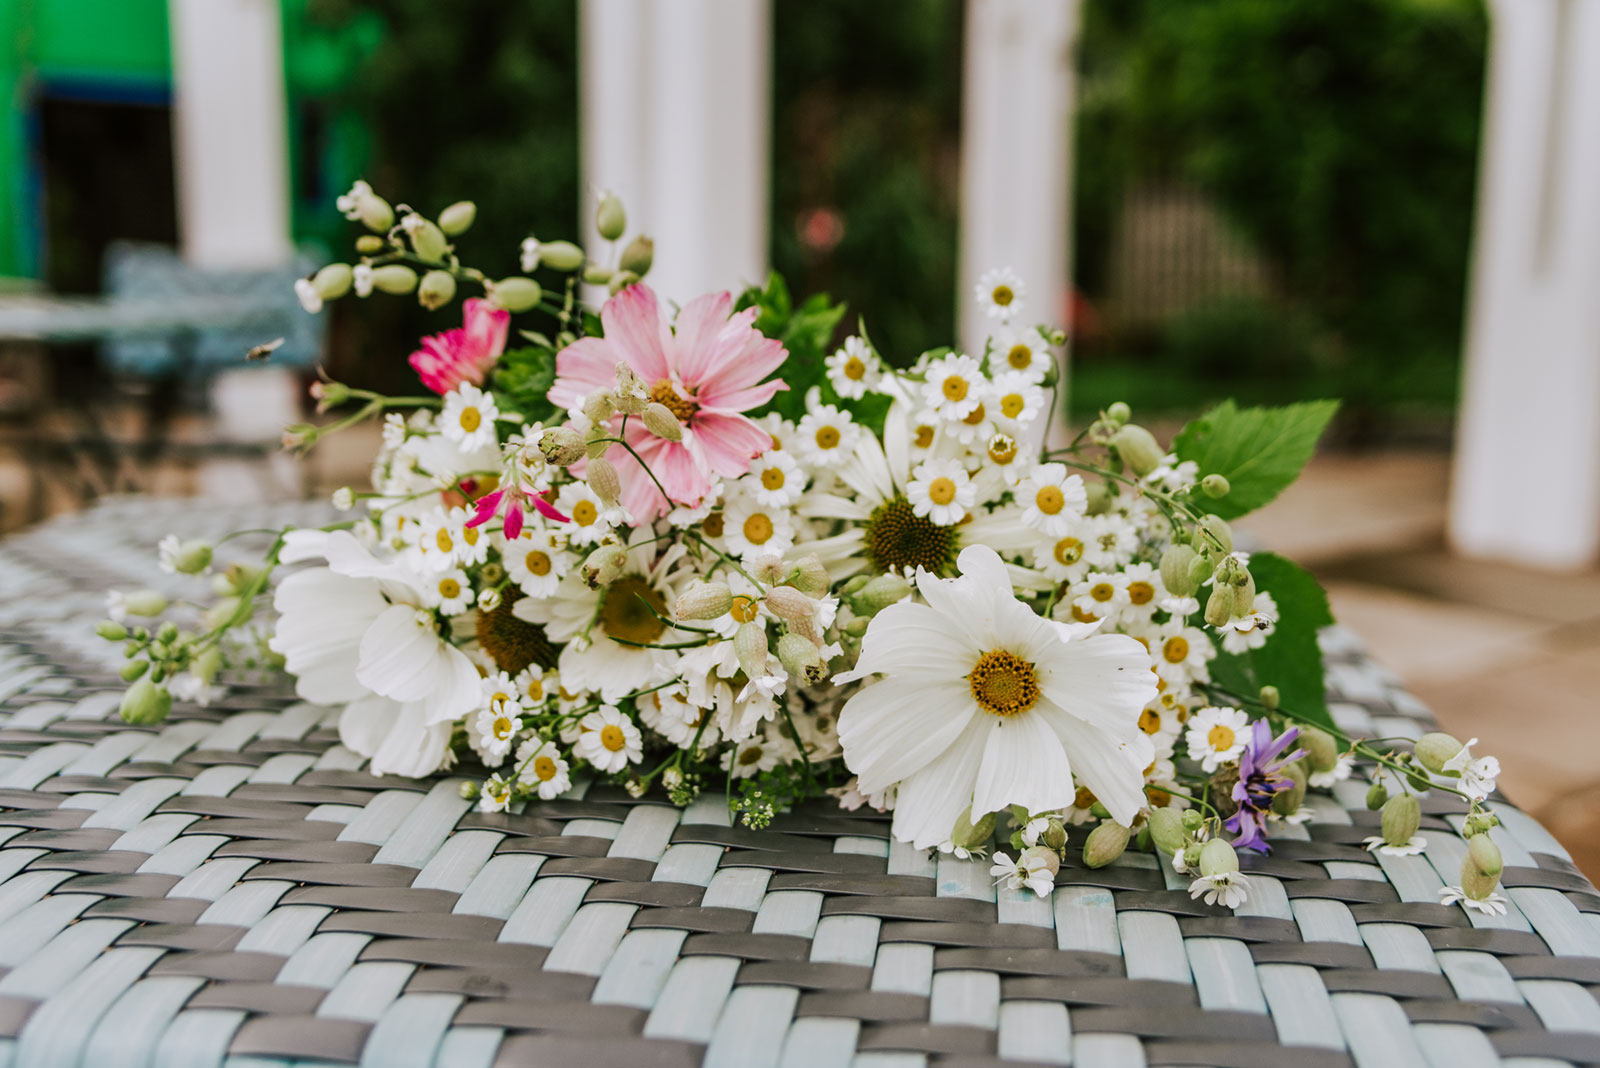  Bouquet with daisies and baby's breath - Get Married in Cornwall with eeek!